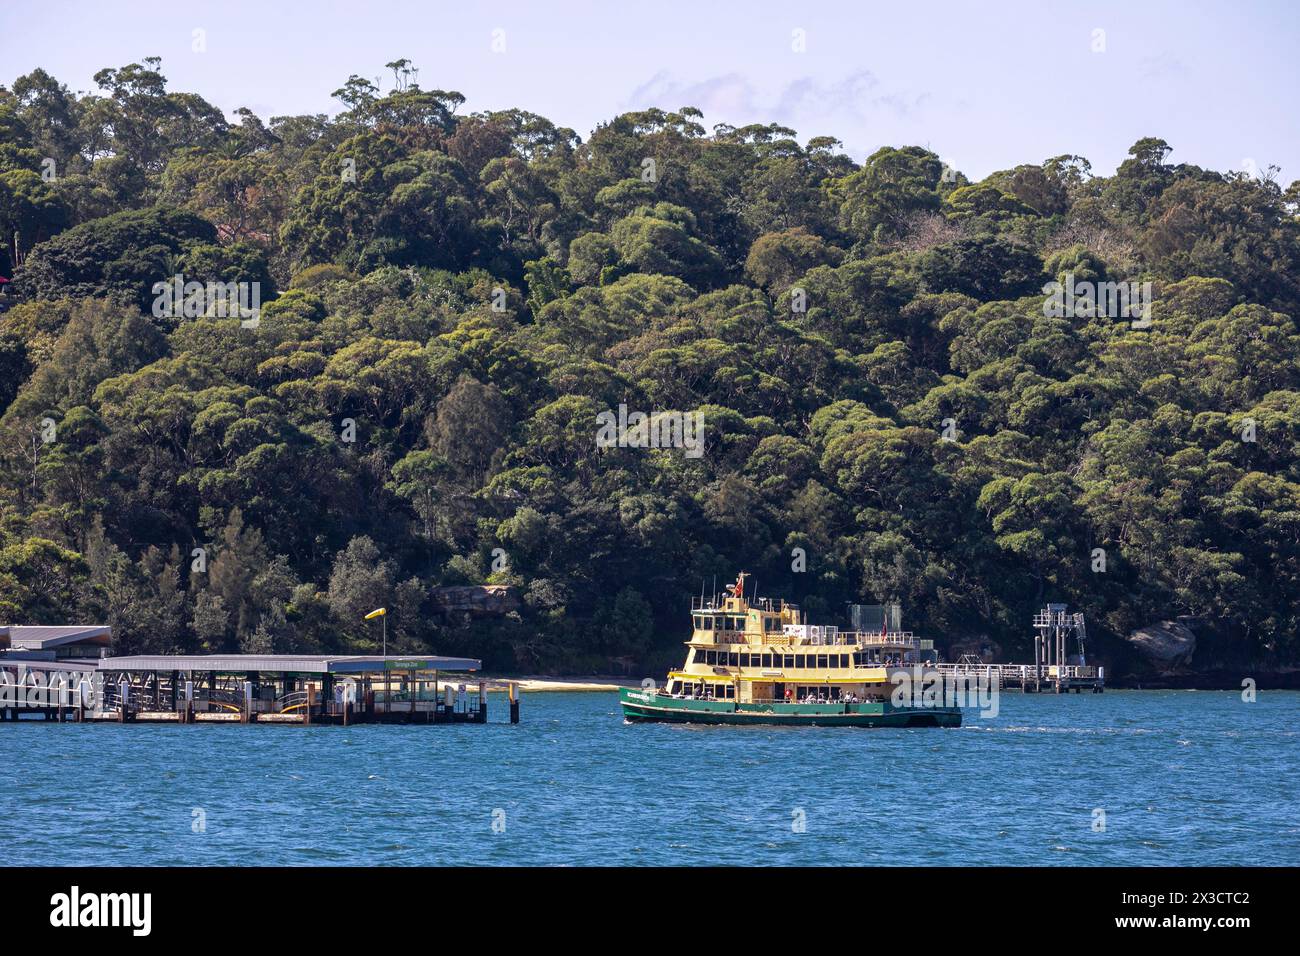 Taronga Zoo ferry wharf on lower north shore of Sydney harbour harbour, Sydney ferry Scarborough approaches the wharf, NSW,Australia Stock Photo